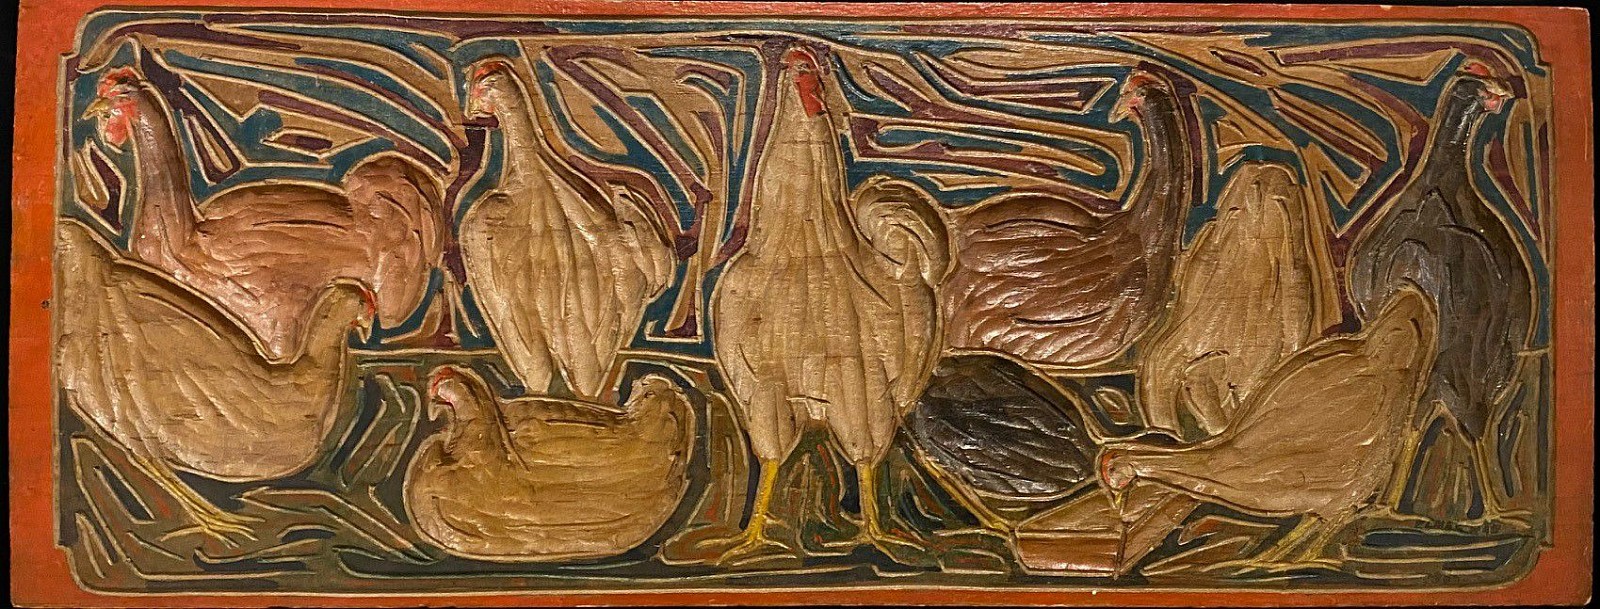 Elmer Livingston MacRae, Chickens, circa 1925
carved and painted wood, 7 1/2"" x 19 3/4""
JCA 6699.01
$1,500